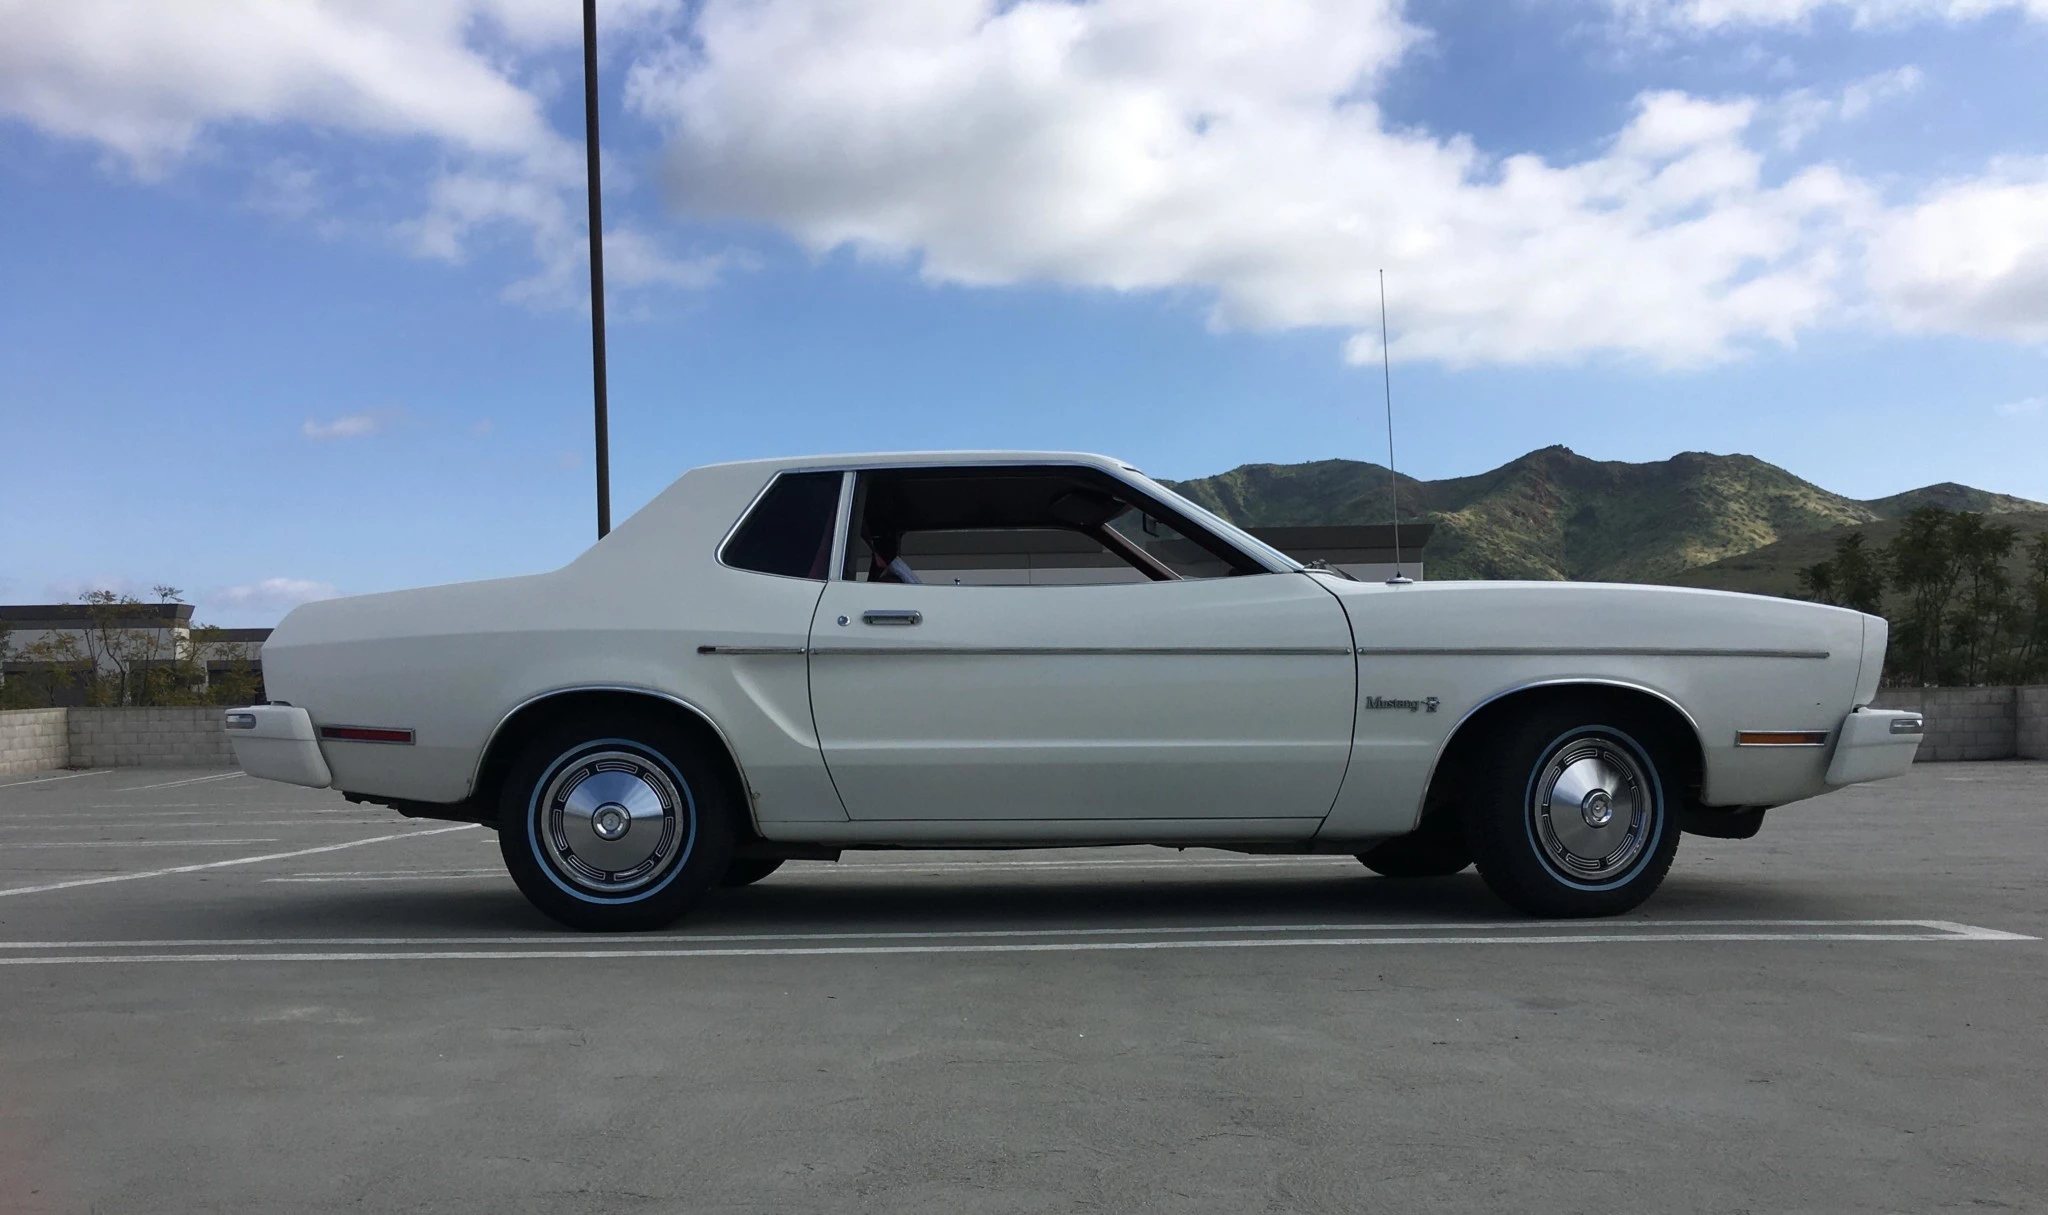 Mustang Of The Day: 1974 Ford Mustang